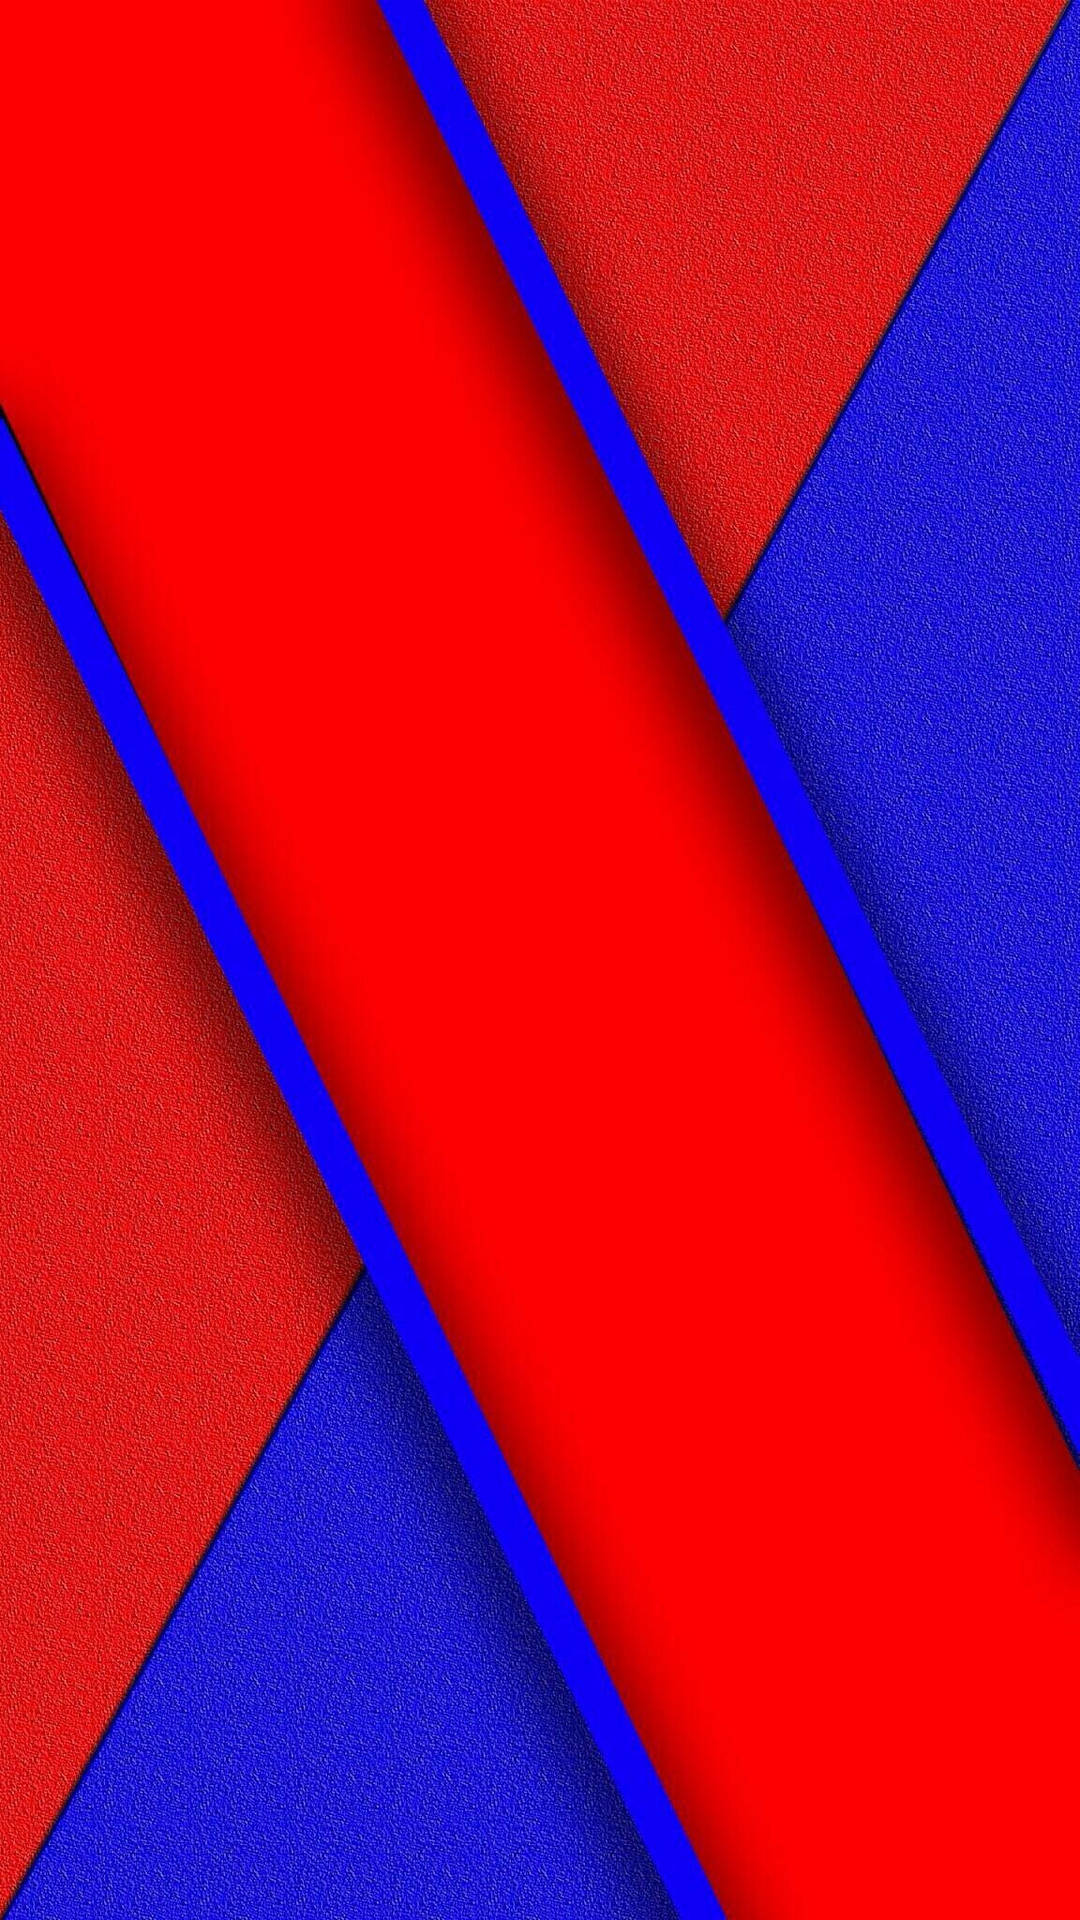 Vibrant Red And Blue Art